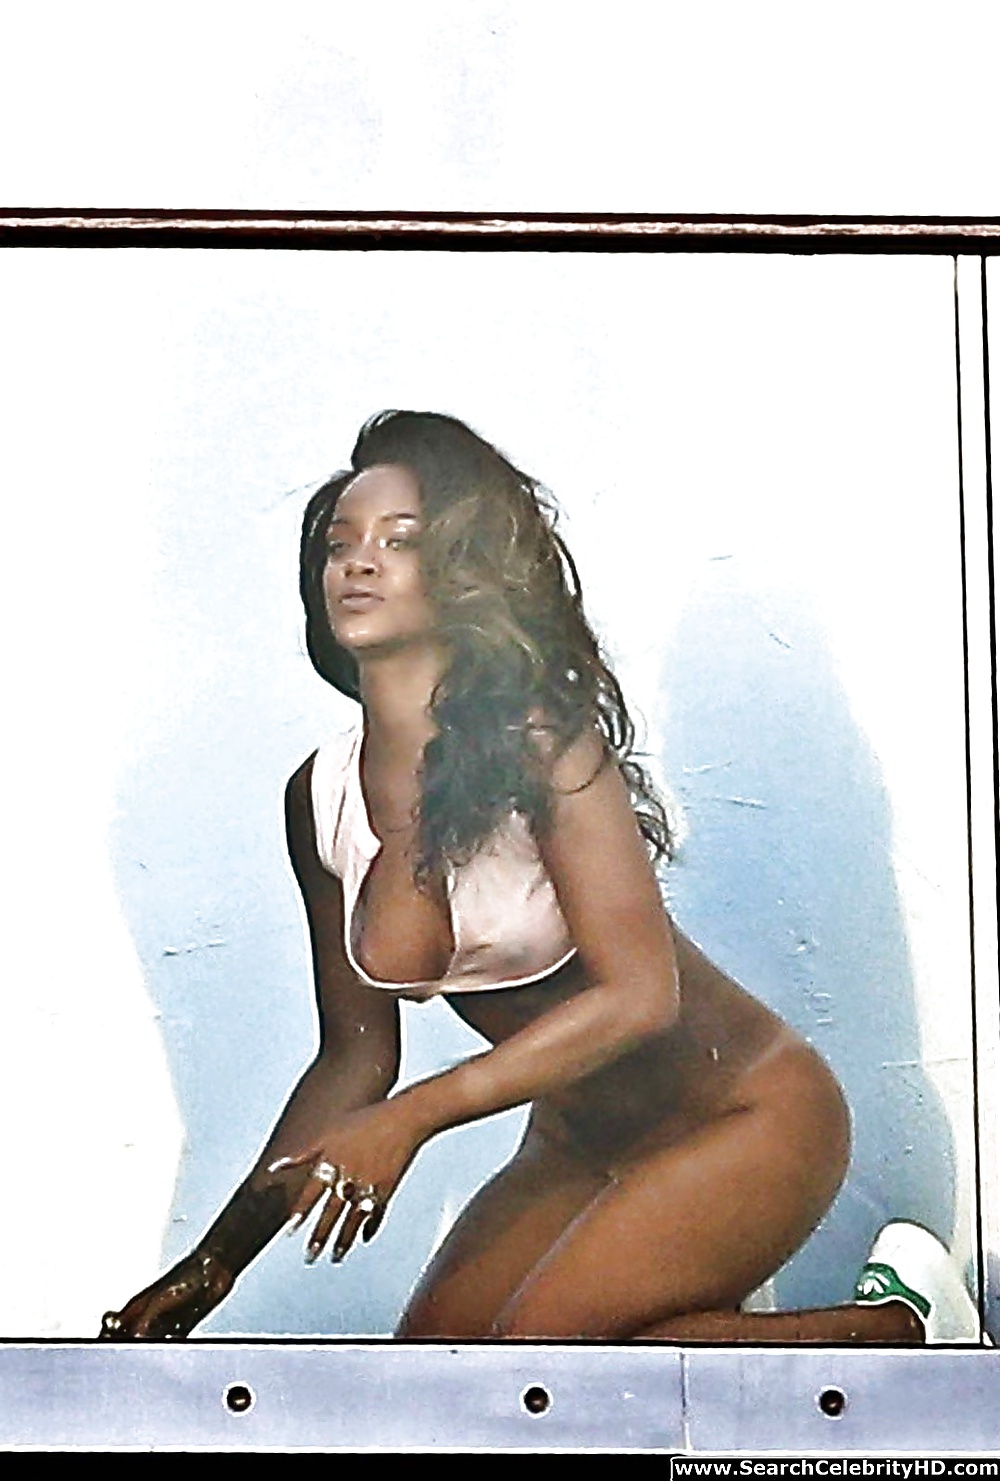 Rihanna bottomless culo nudo photoshoot in l.a
 #26033651